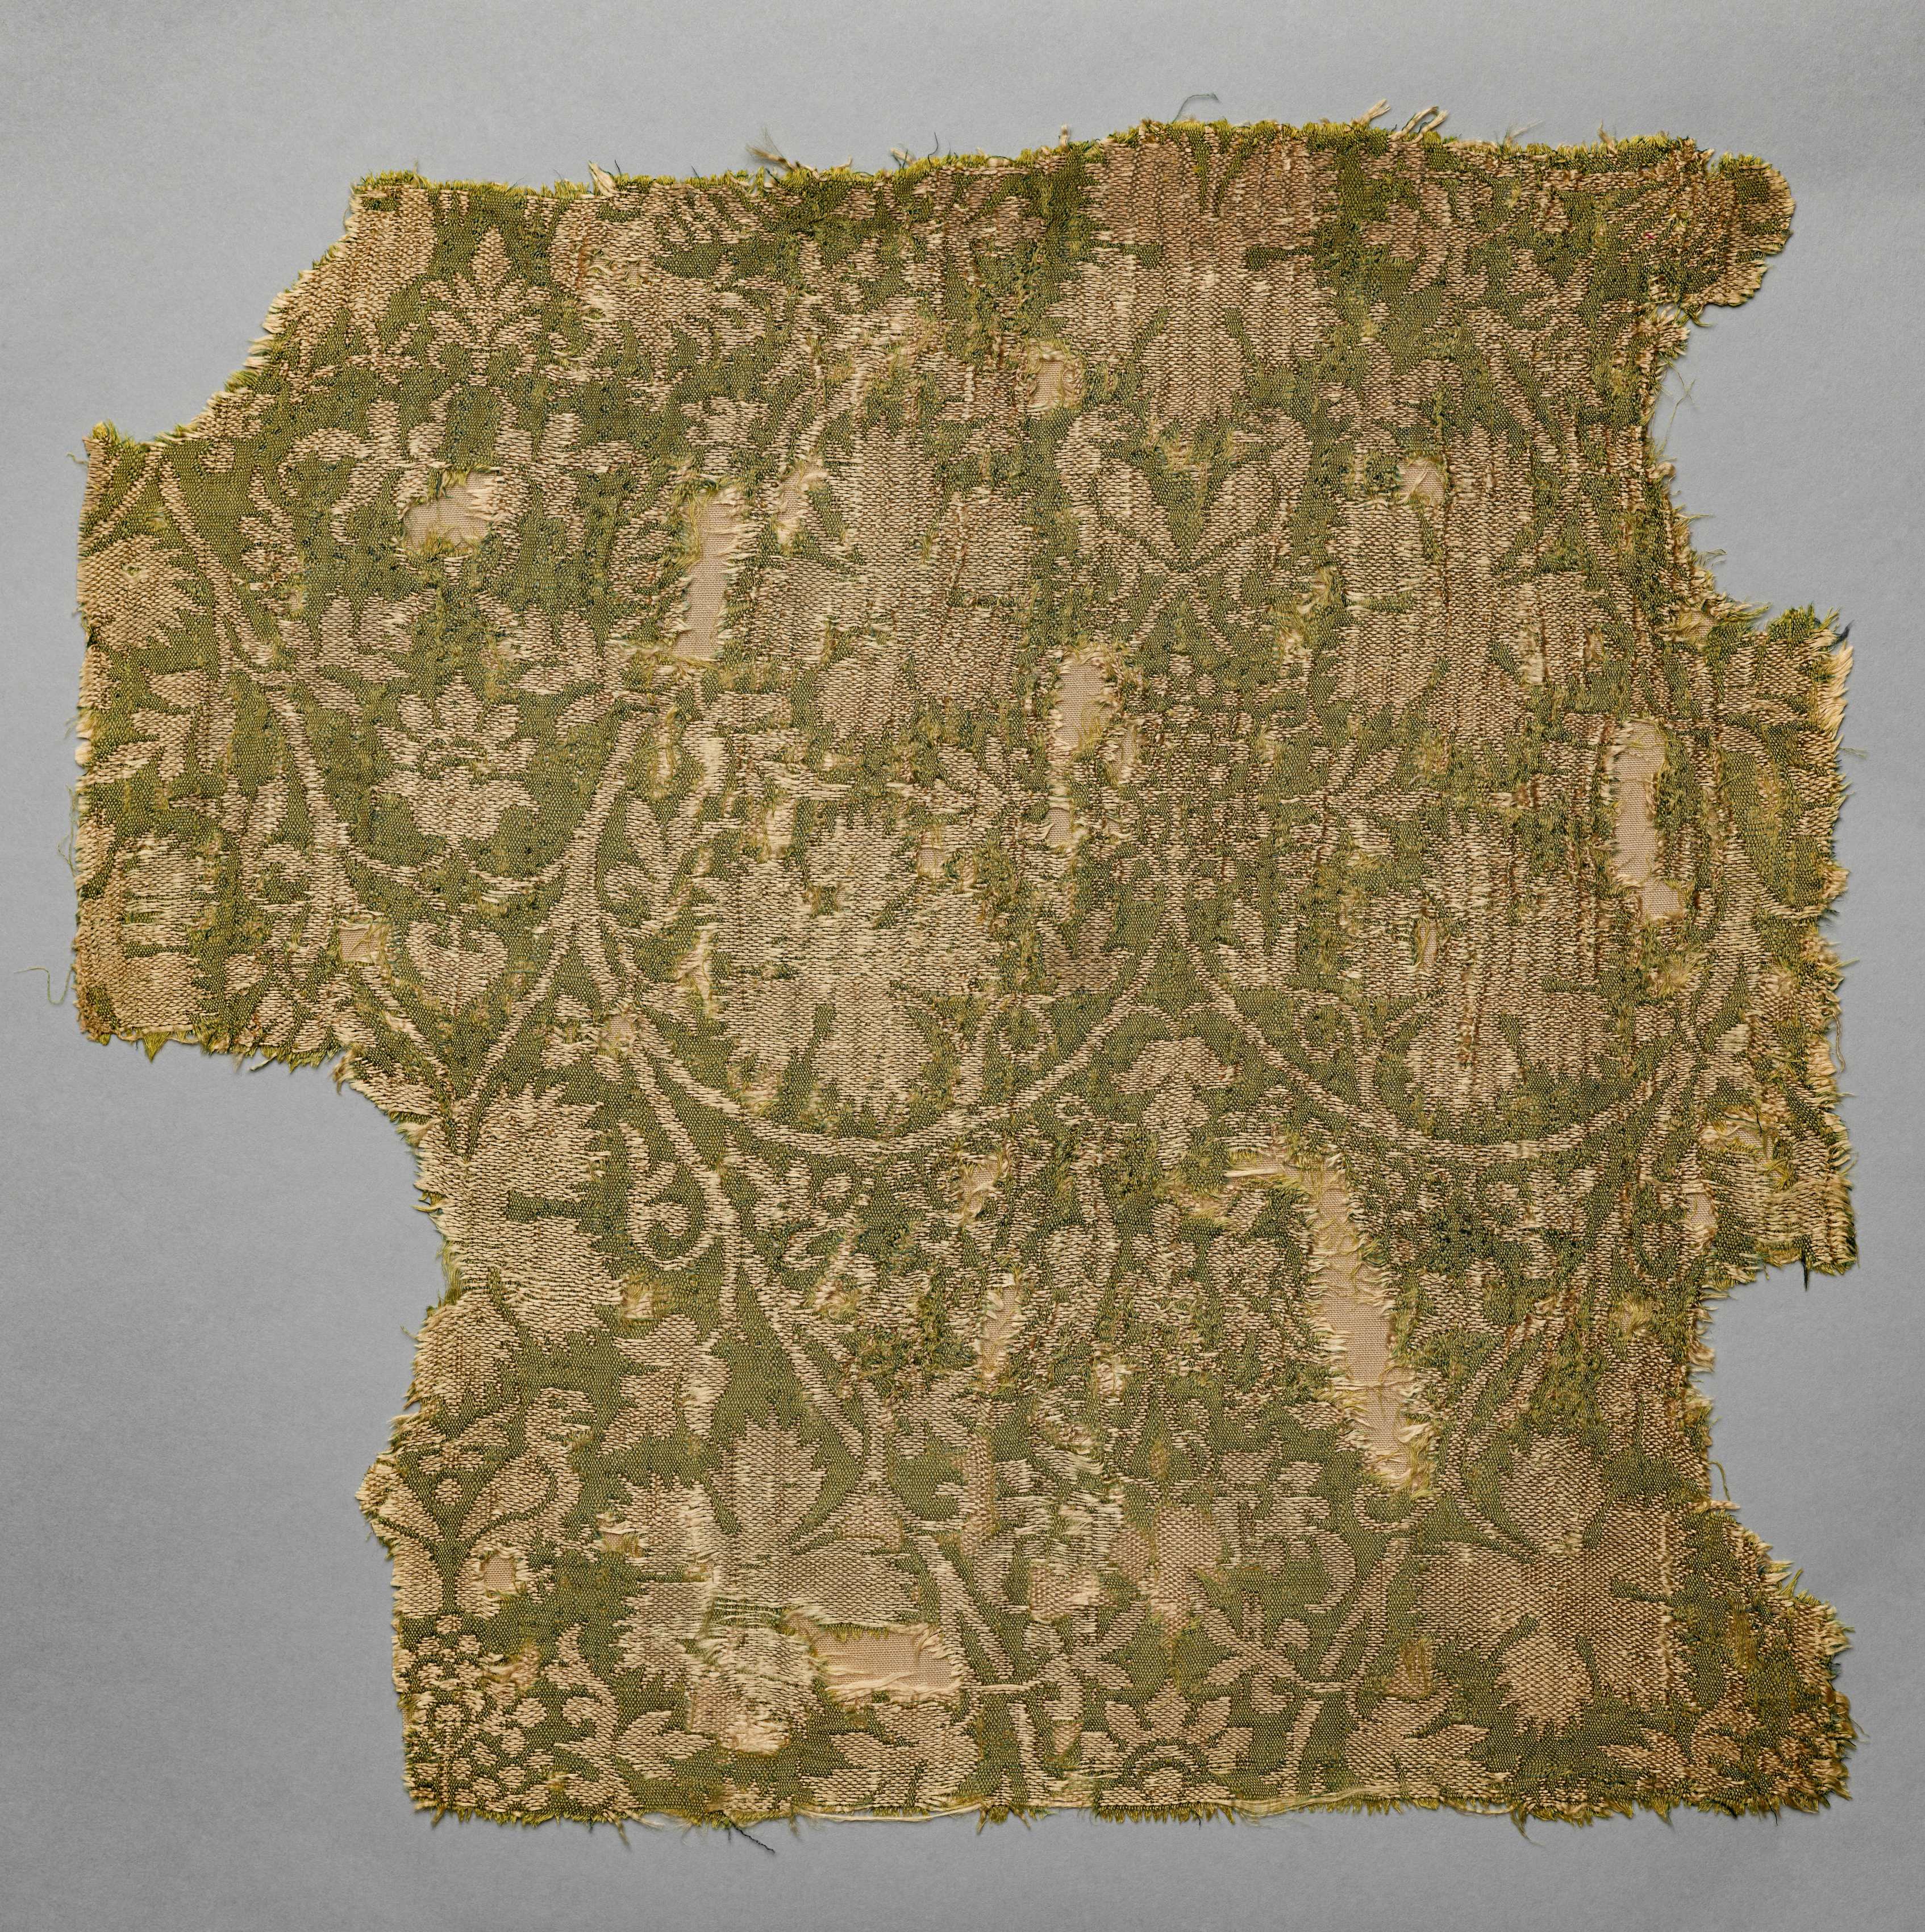 Silk fragment with scrolling vines, grape leaves, grapes, and birds